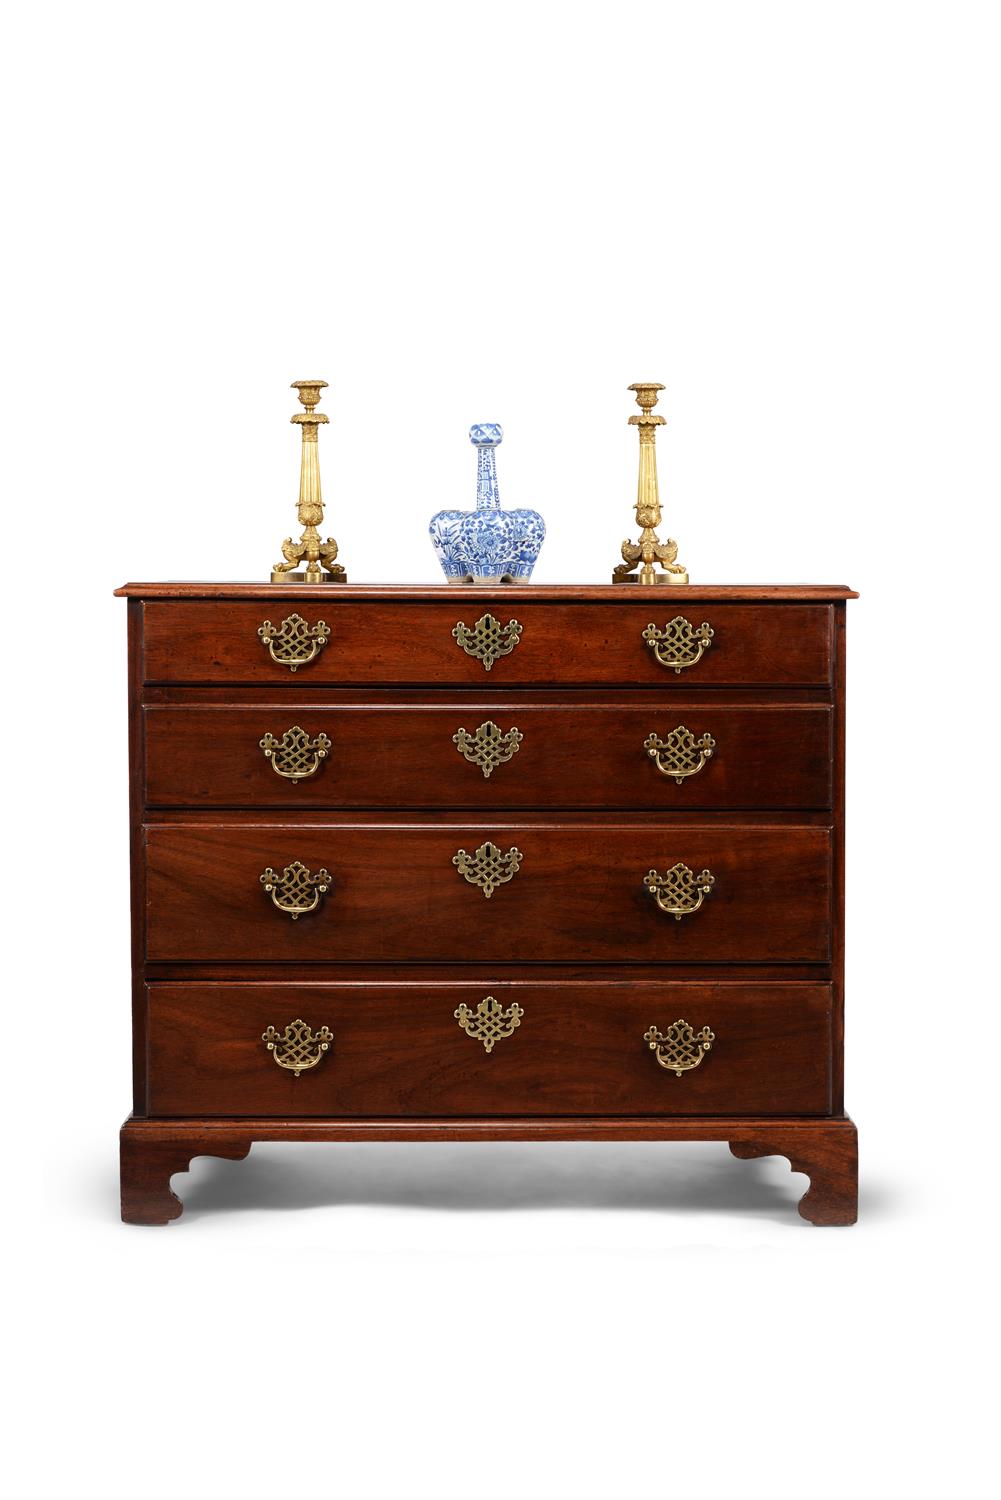 A George III padouk chest of drawers, circa 1780